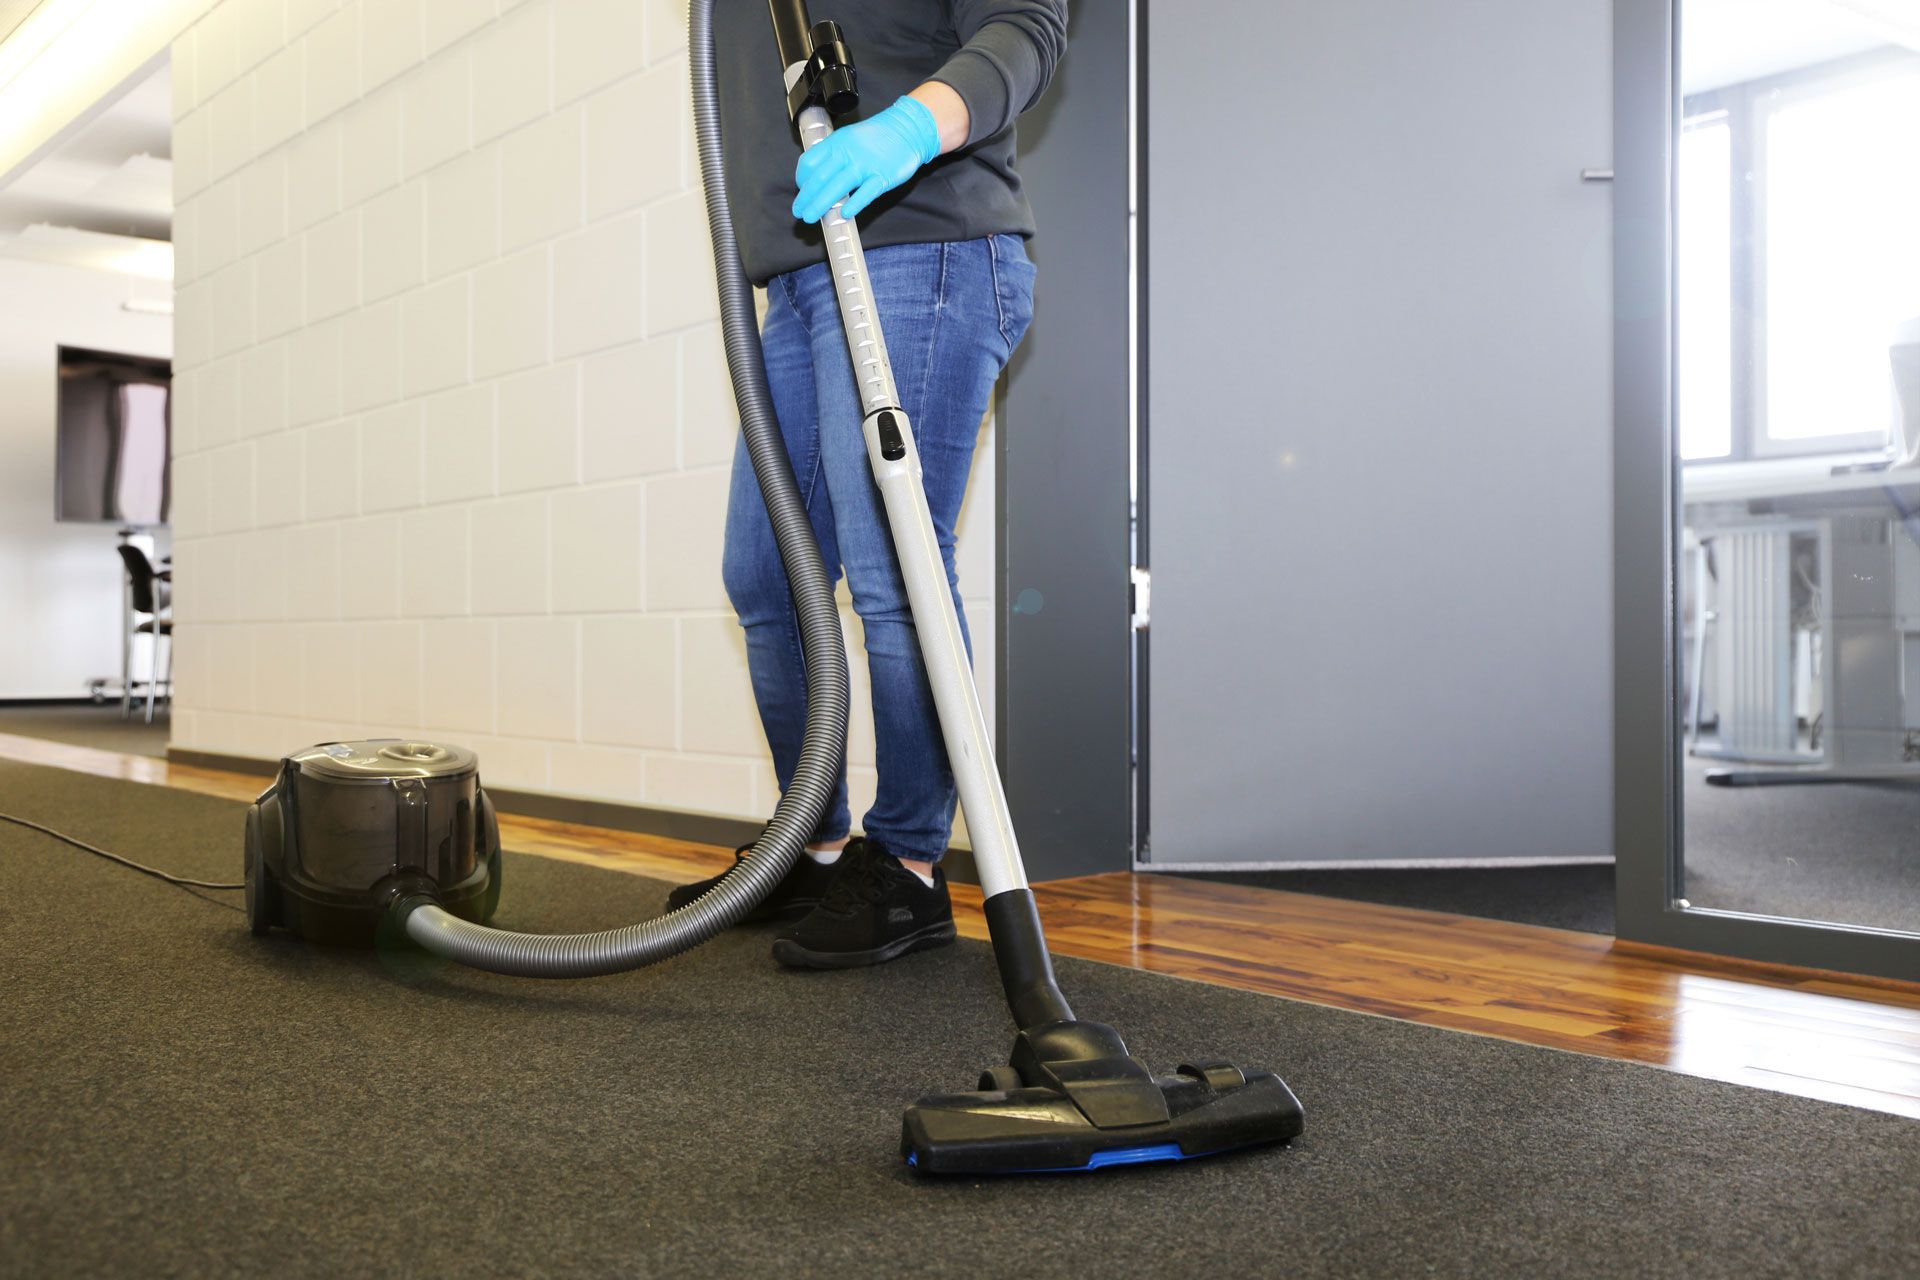 Cleaning the Carpet Using Vacuum Cleaner